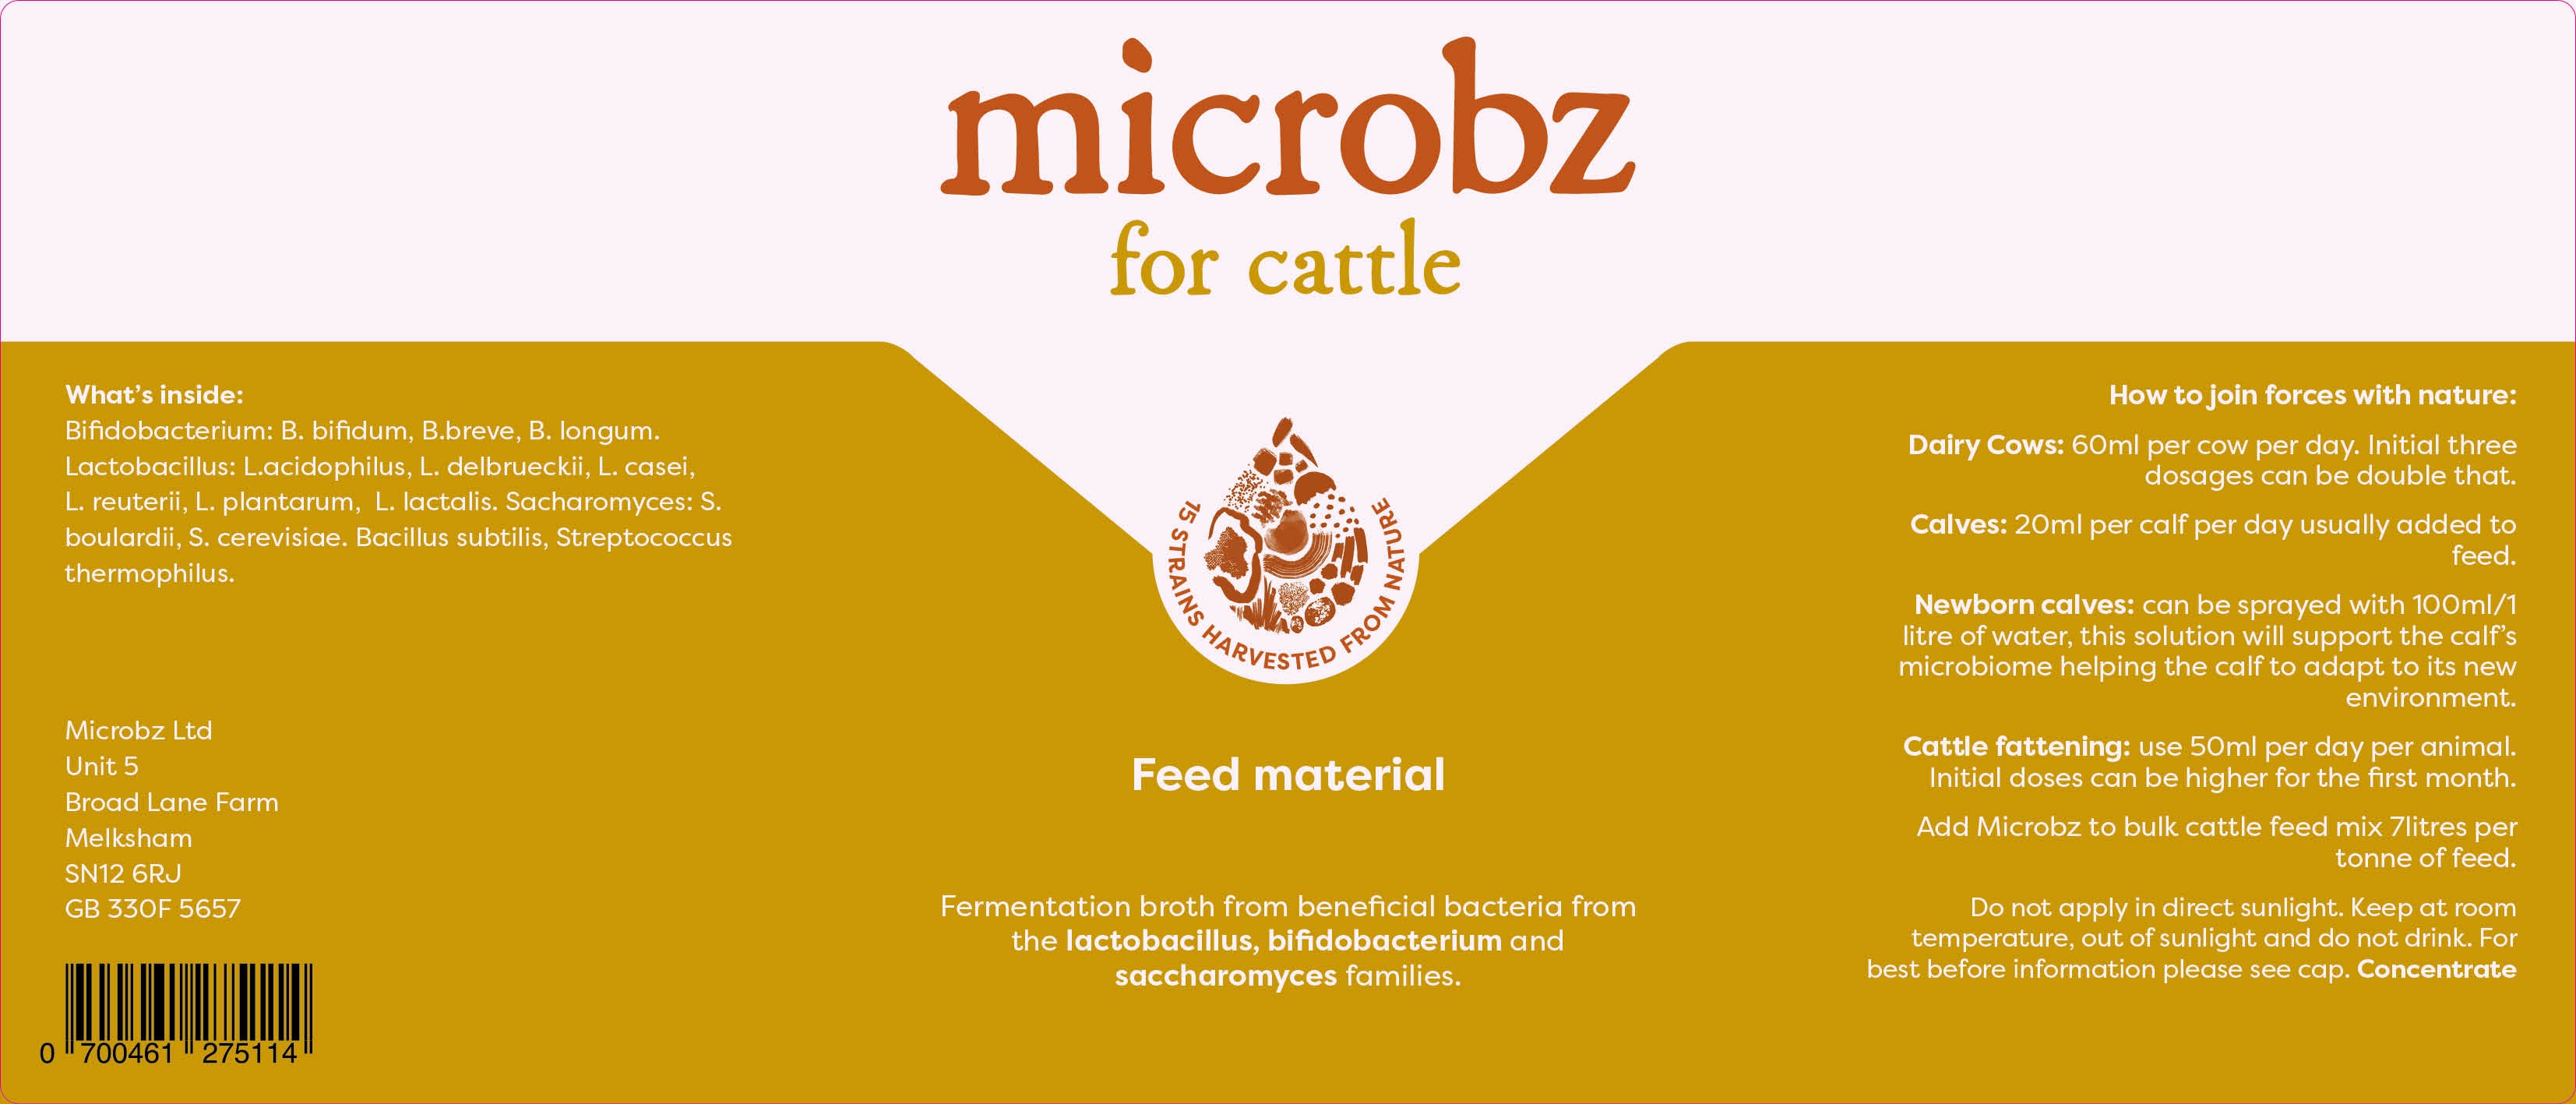 microbz for cattle label